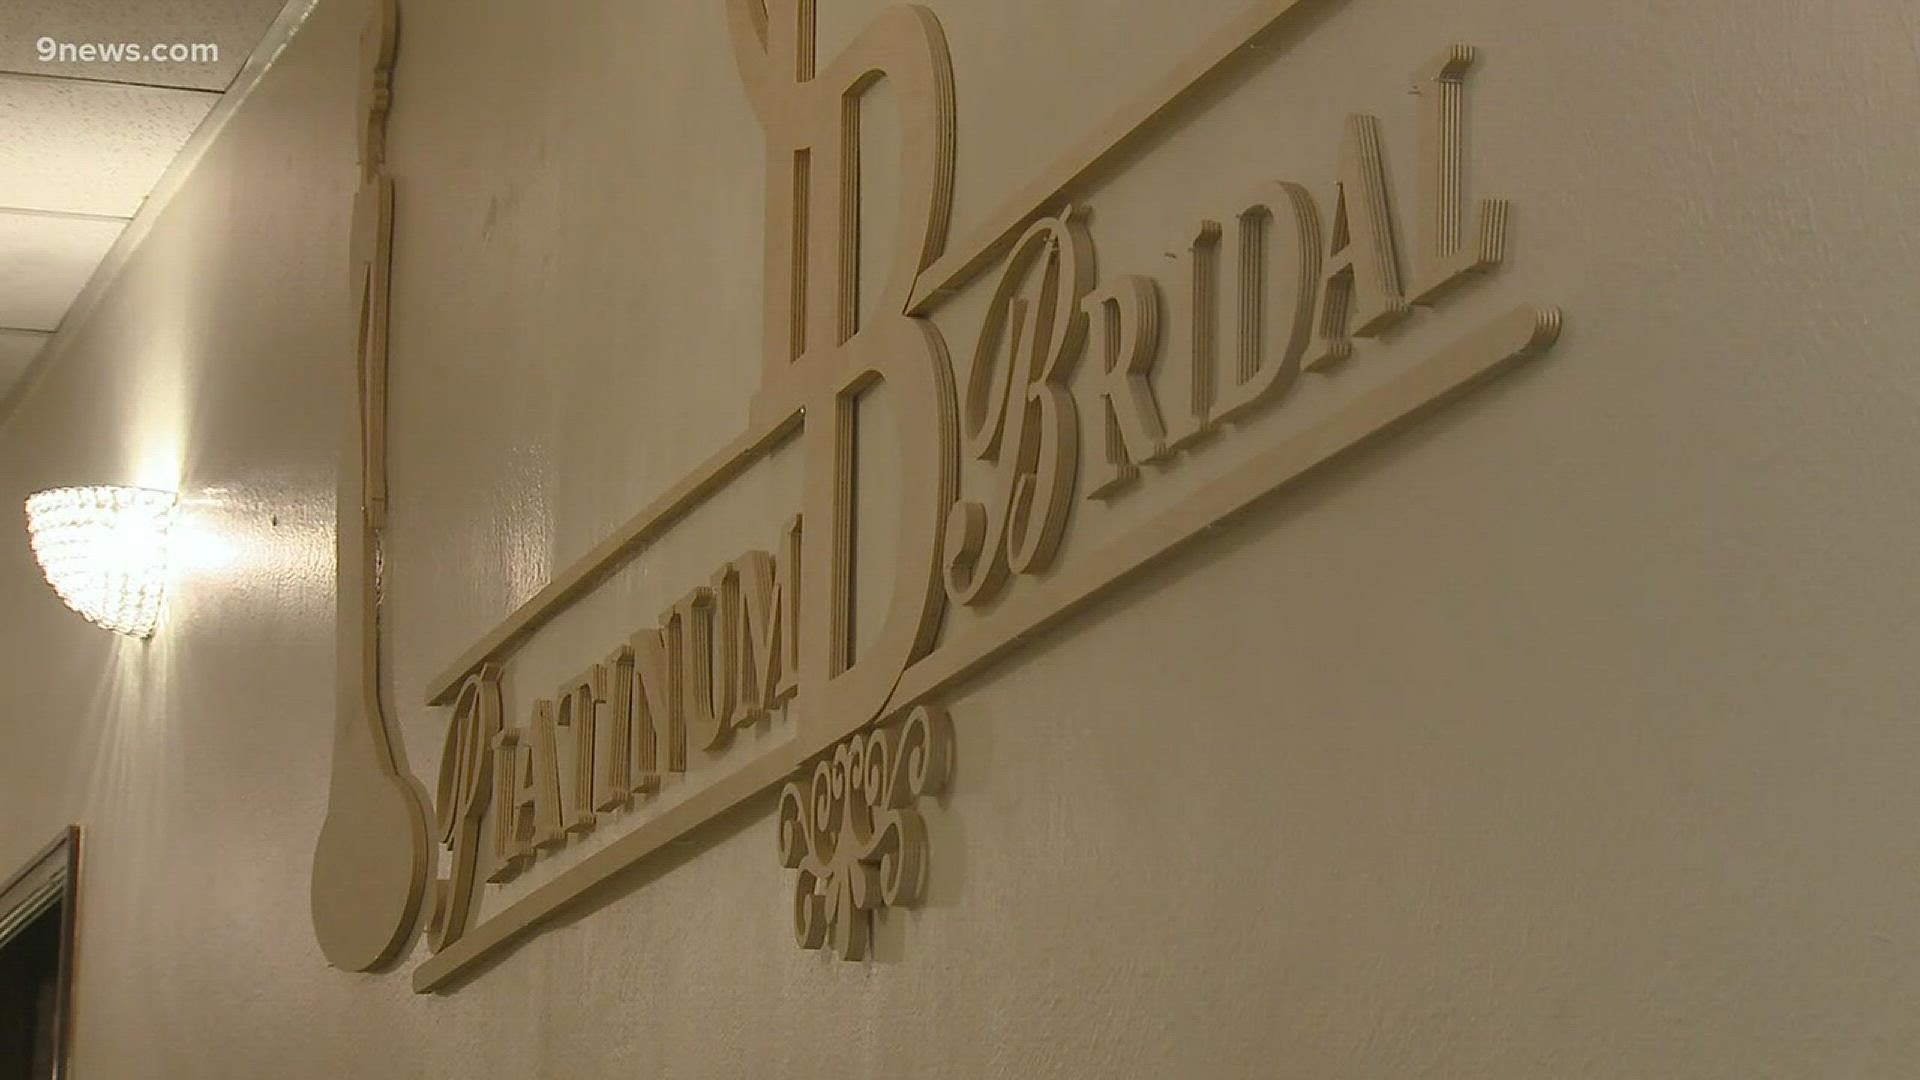 For Small Business Saturday, Gregg Moss introduces us to a local bridal shop in Thornton.